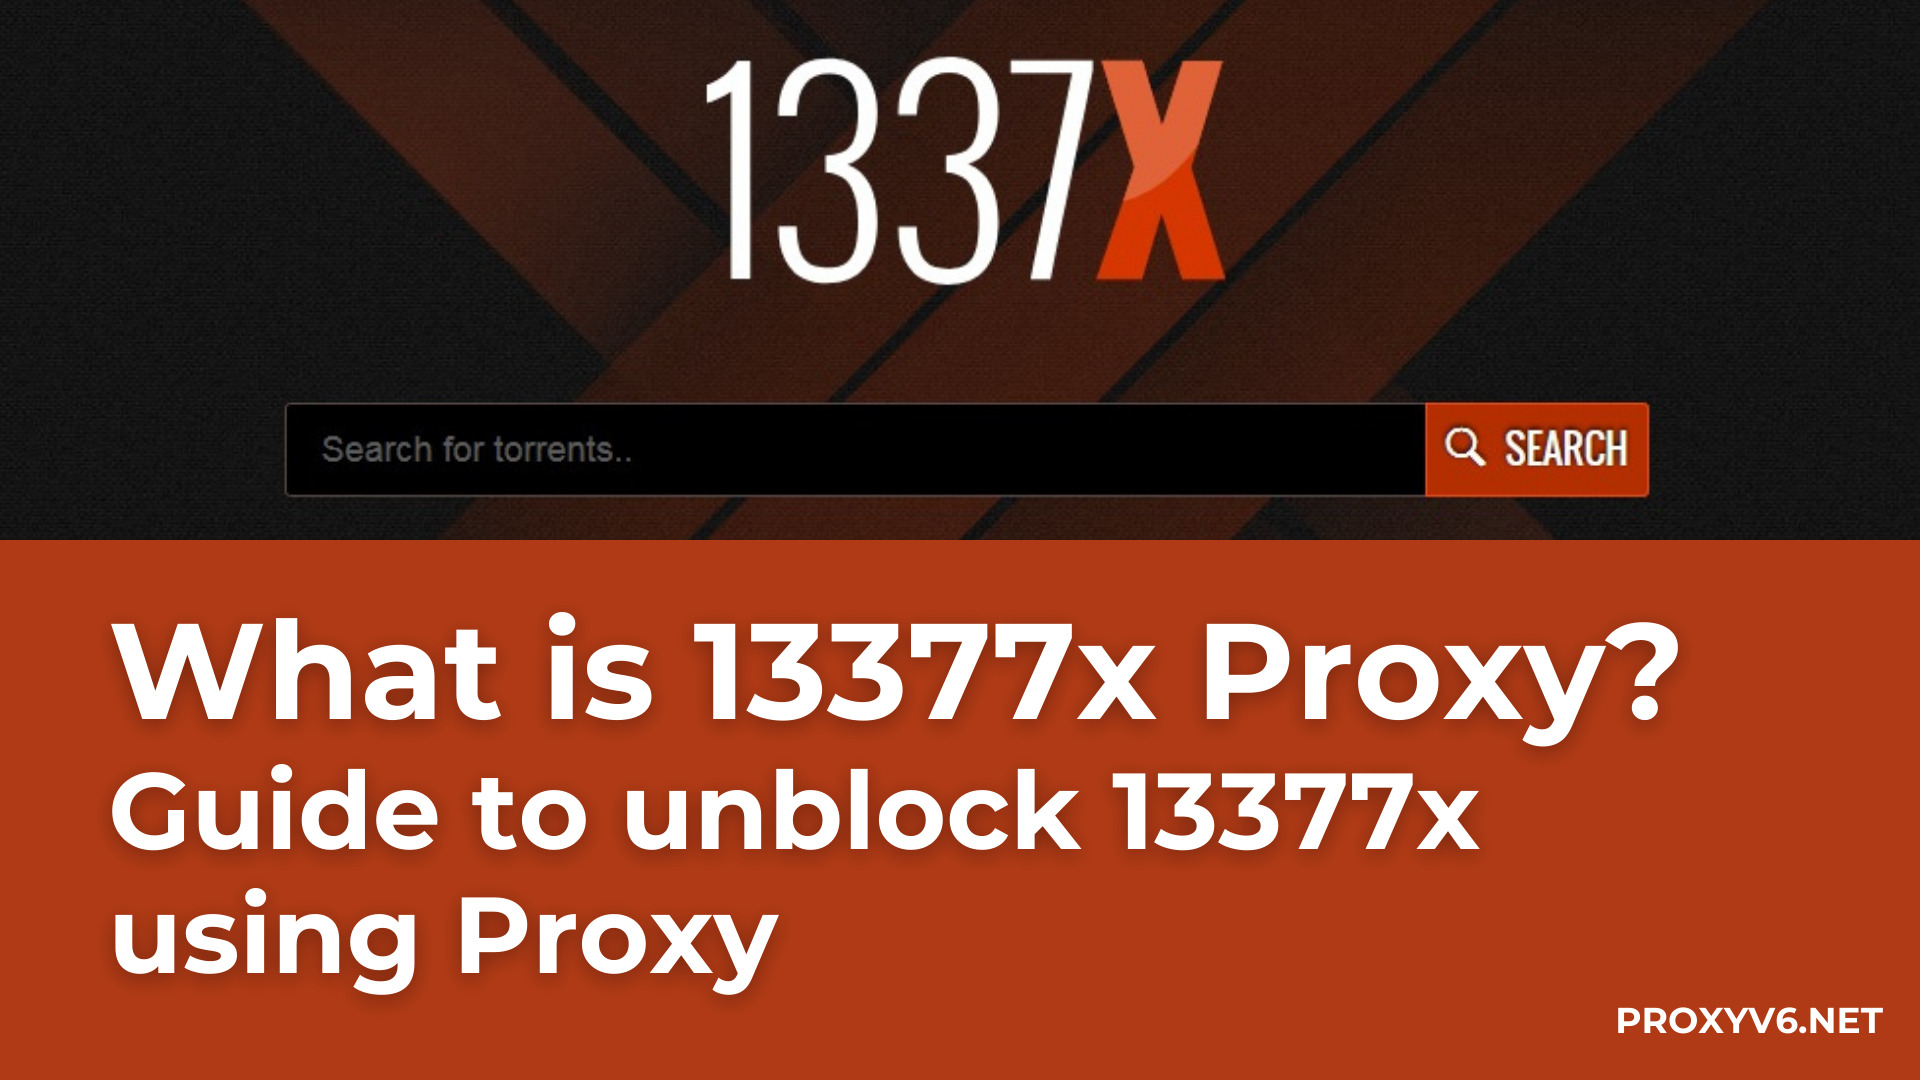 What is 13377x Proxy? Guide to unblock 13377x using Proxy